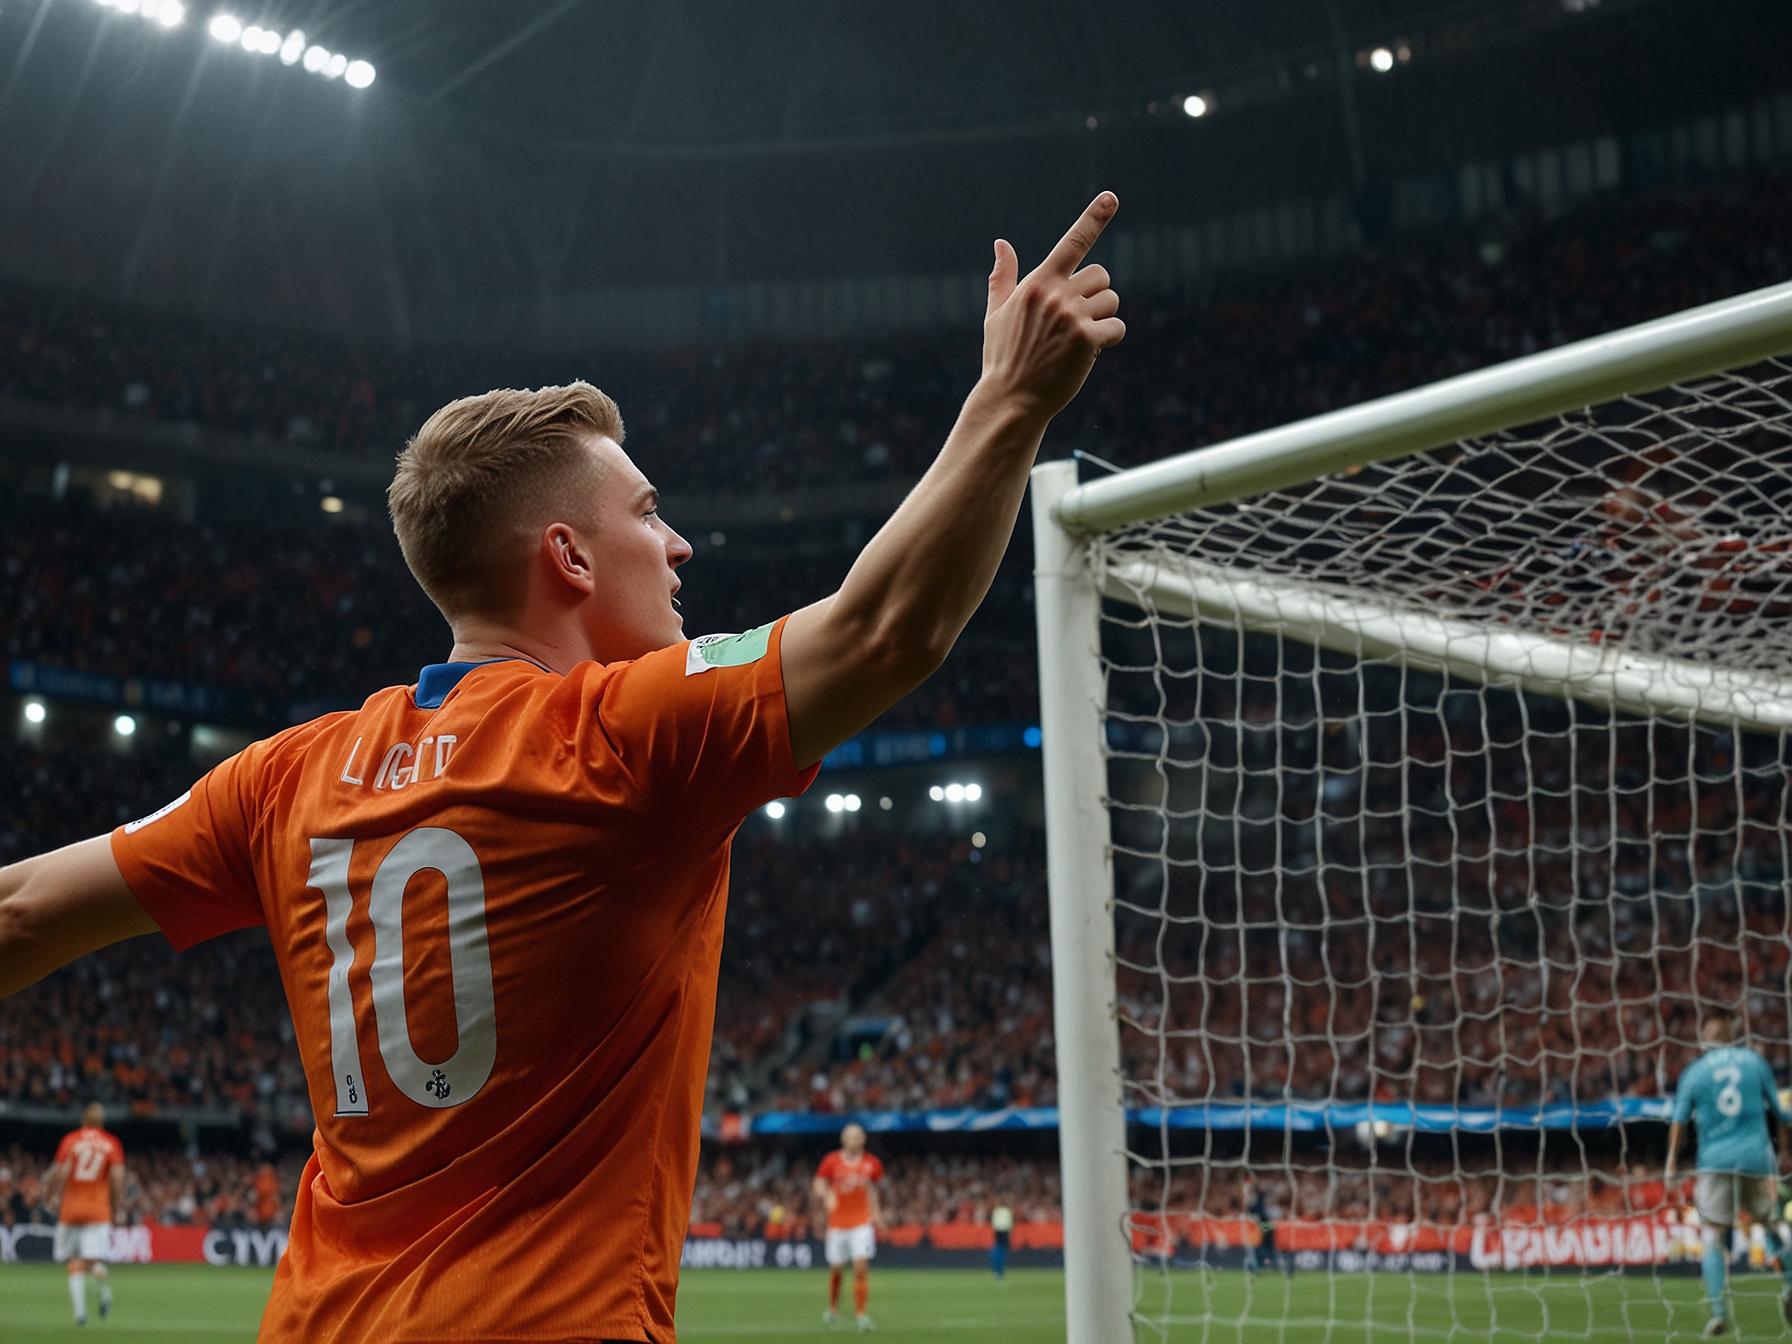 Matthijs de Ligt heads the ball into the net from a corner kick, equalizing the score before halftime and shifting the momentum in favor of the Netherlands during their Euro 2024 match against Poland.